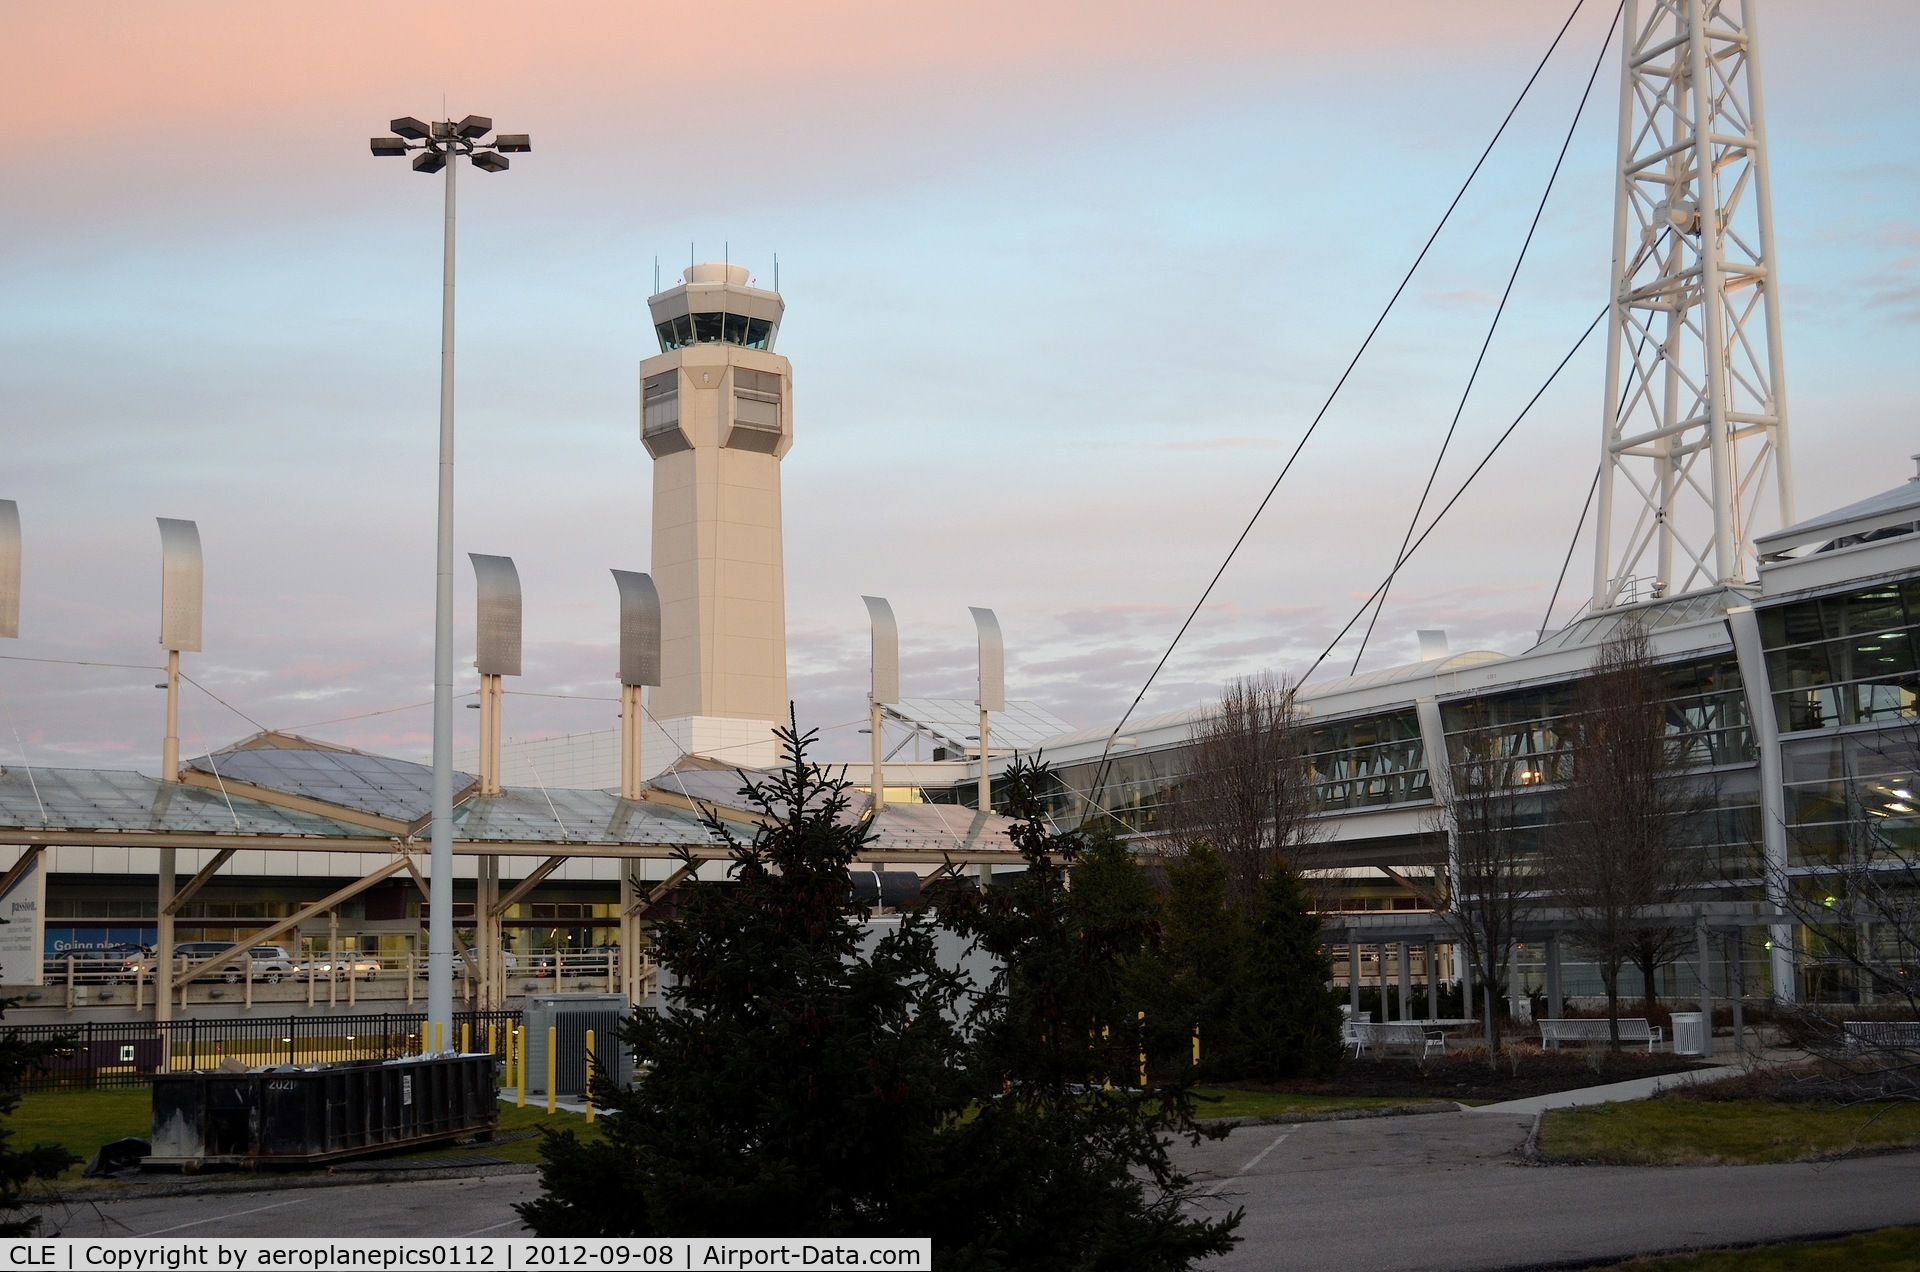 Cleveland-hopkins International Airport (CLE) - Cleveland Hopkins International Airport